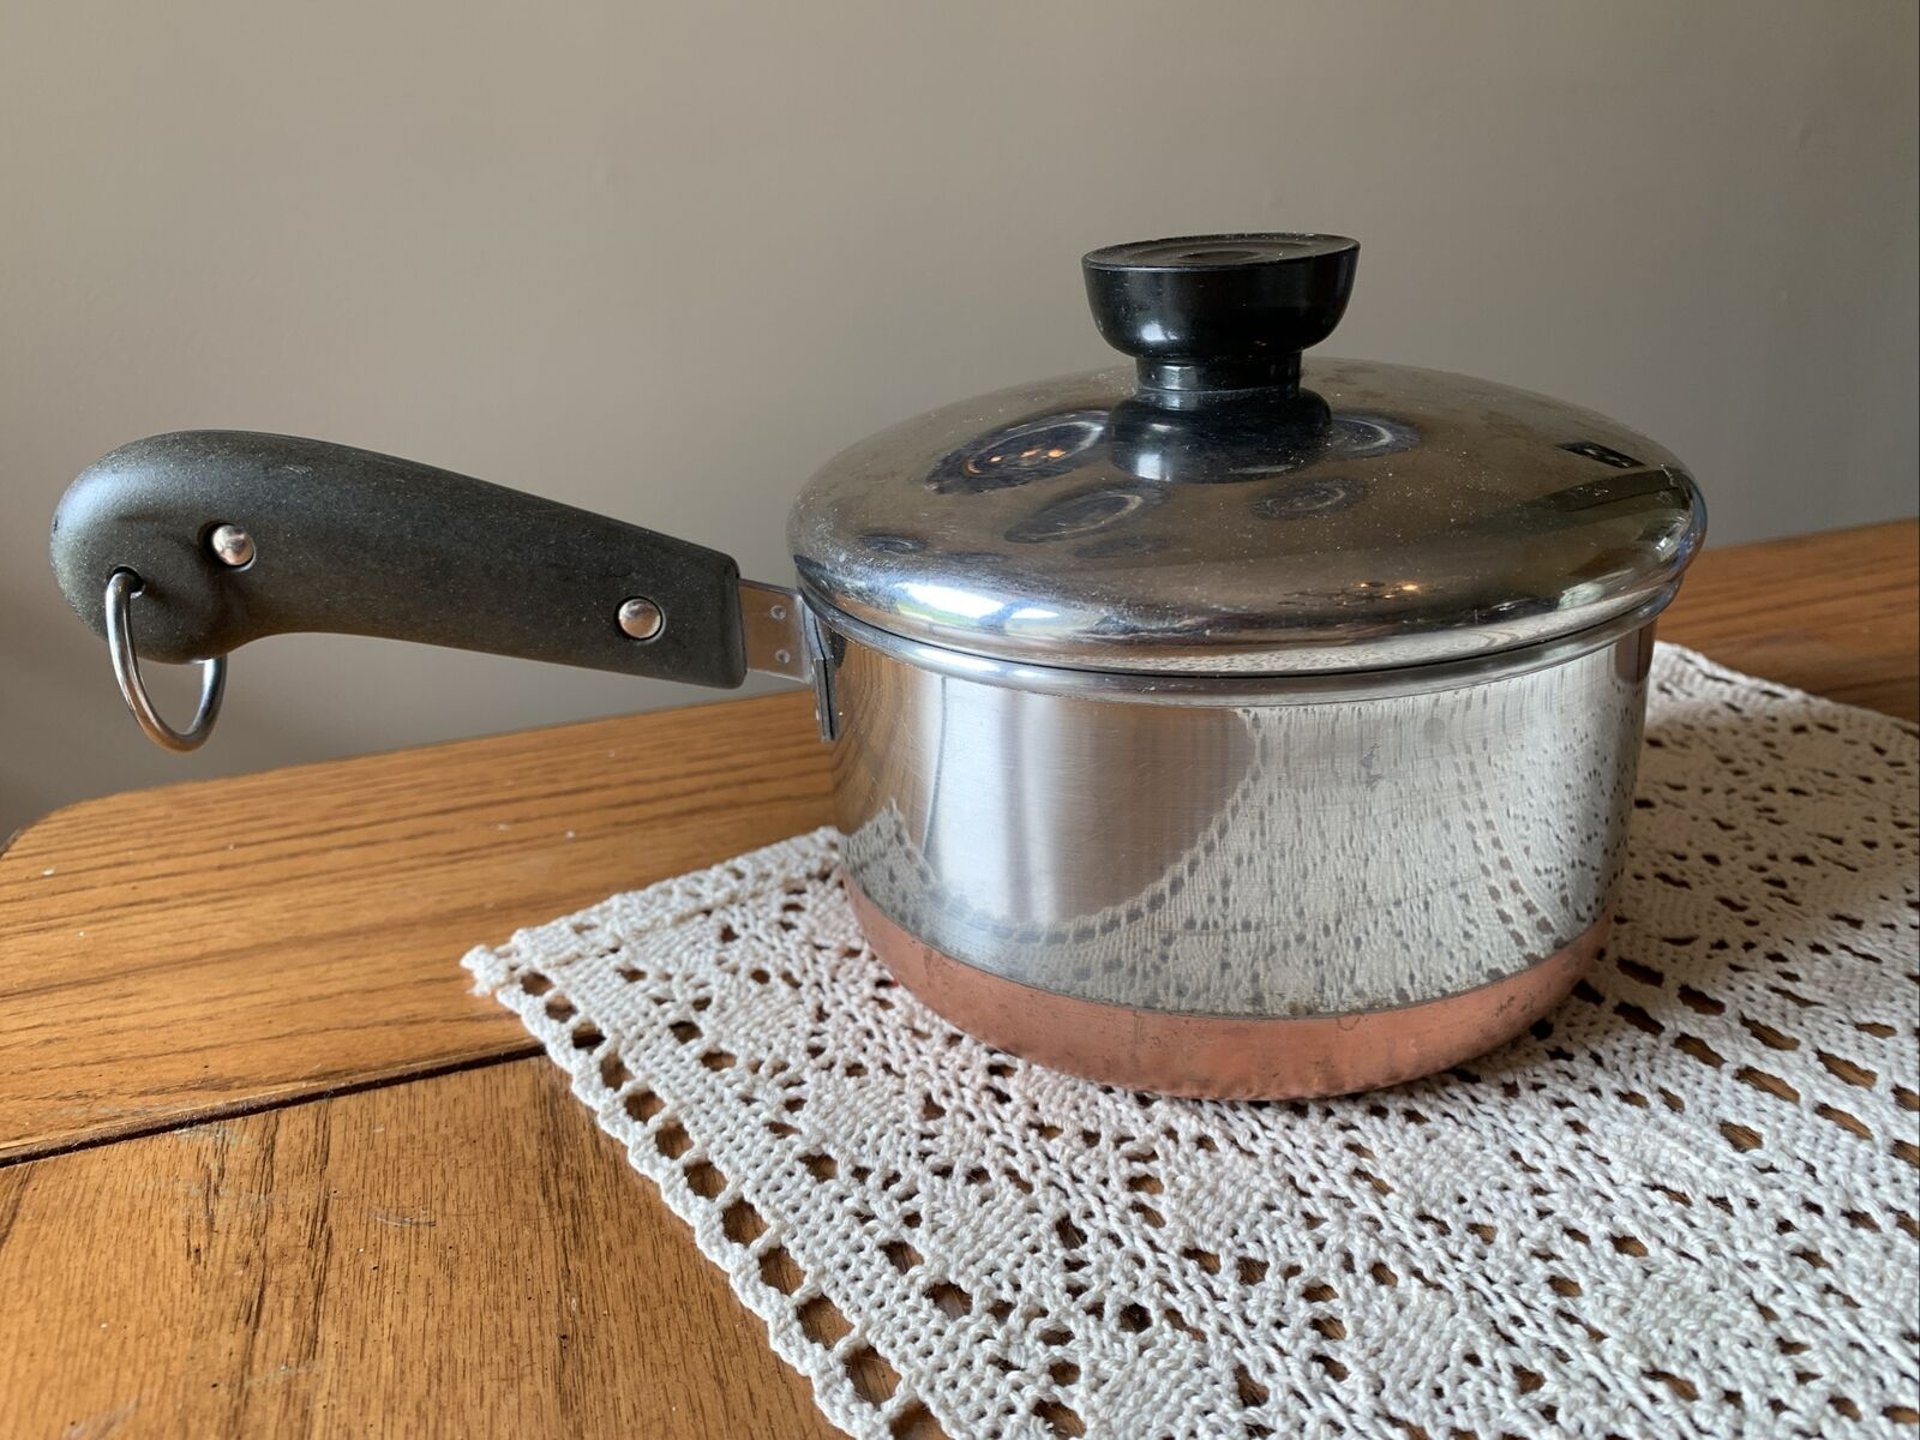 Yesterday I found two copper bottom pans with lids by Revere Ware